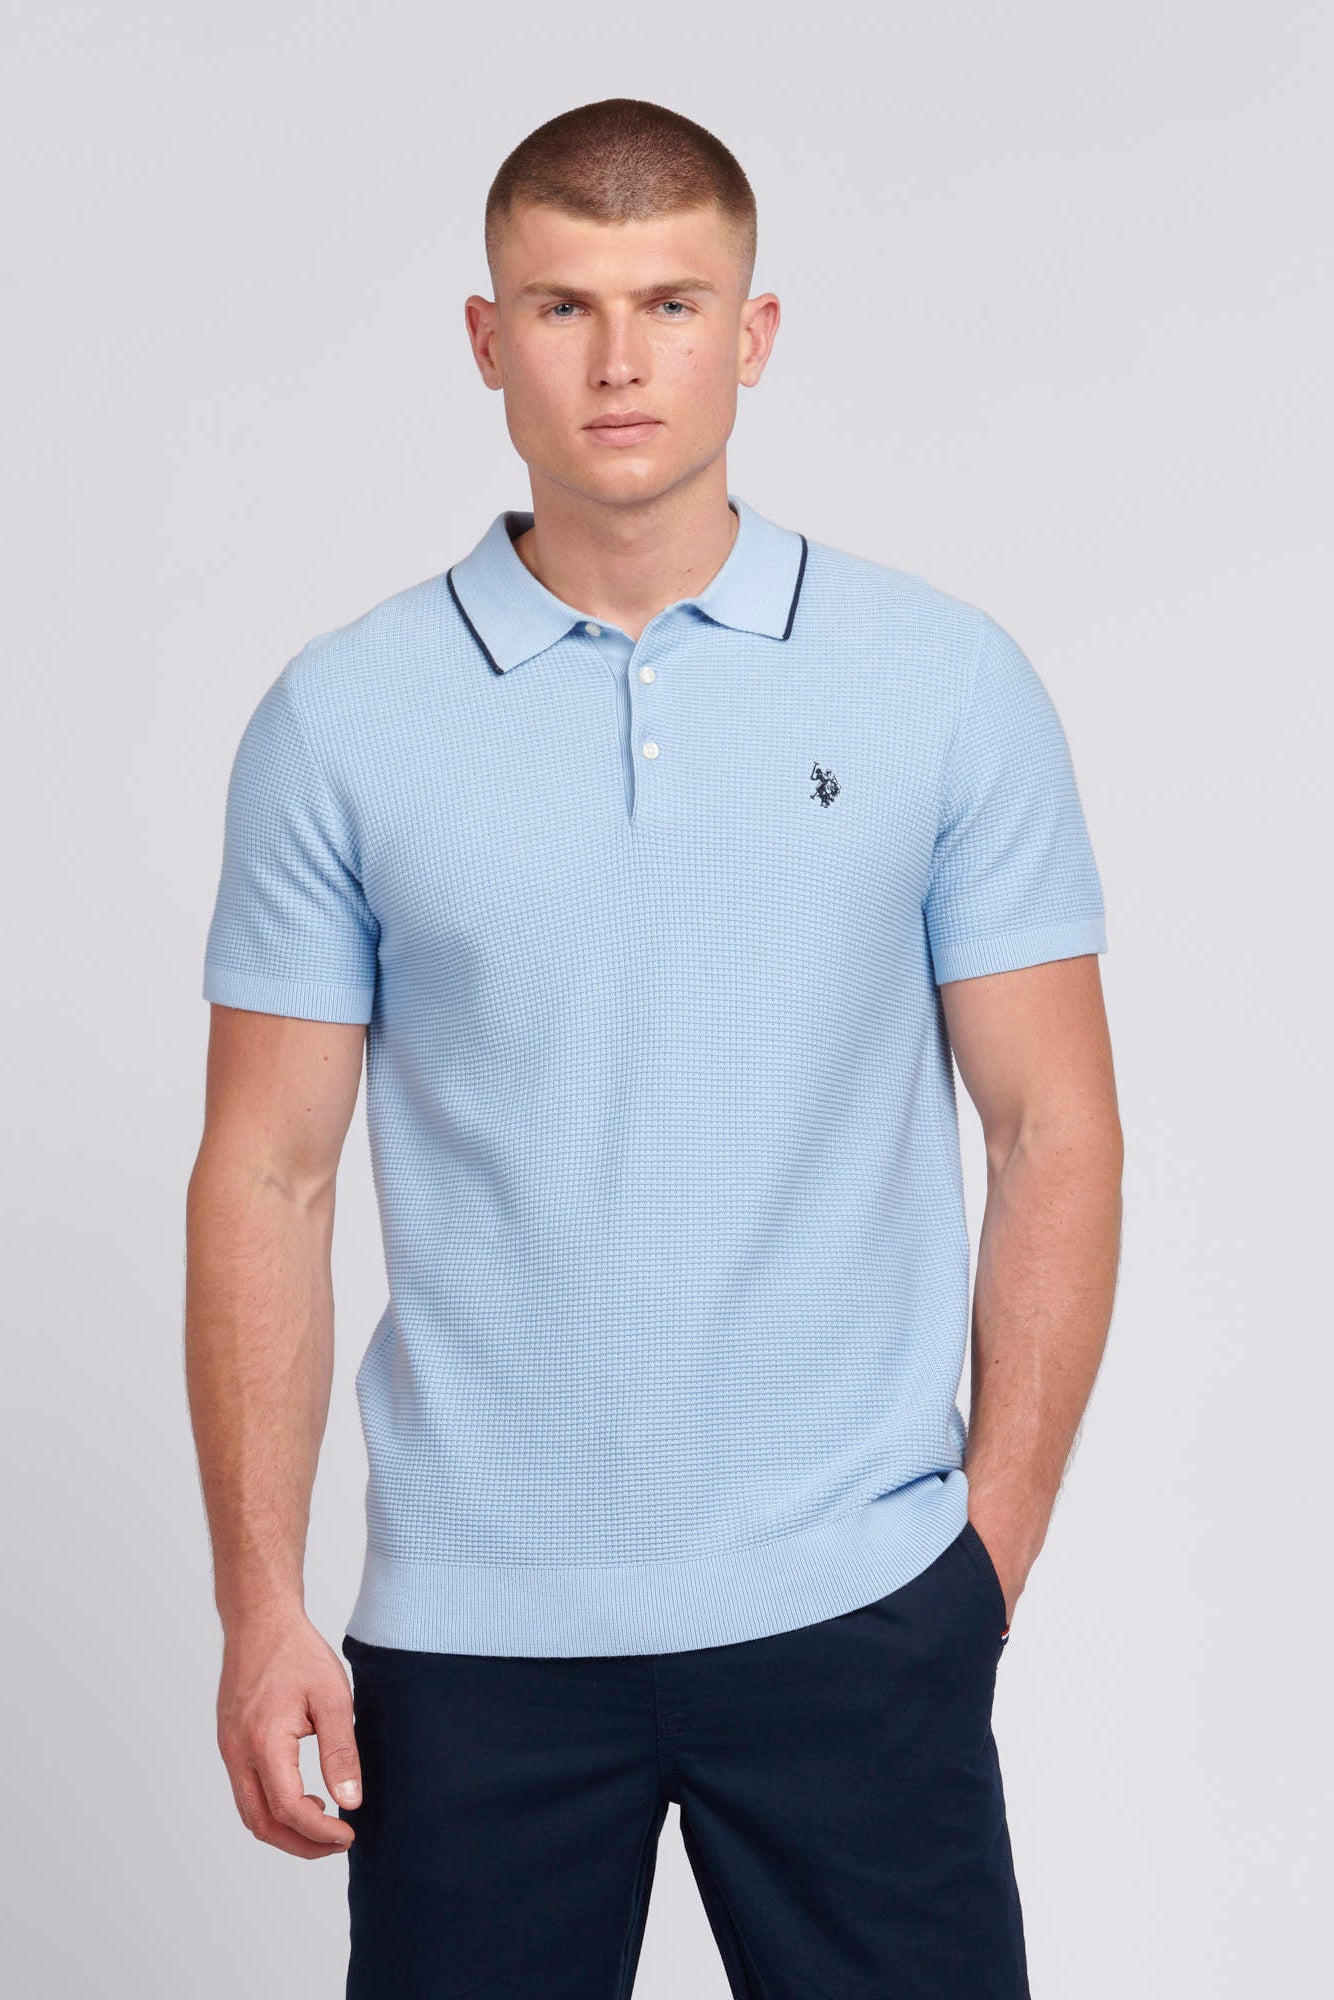 U.S. Polo Assn. Mens Regular Fit Waffle Knit Polo Shirt in Chambray Blue